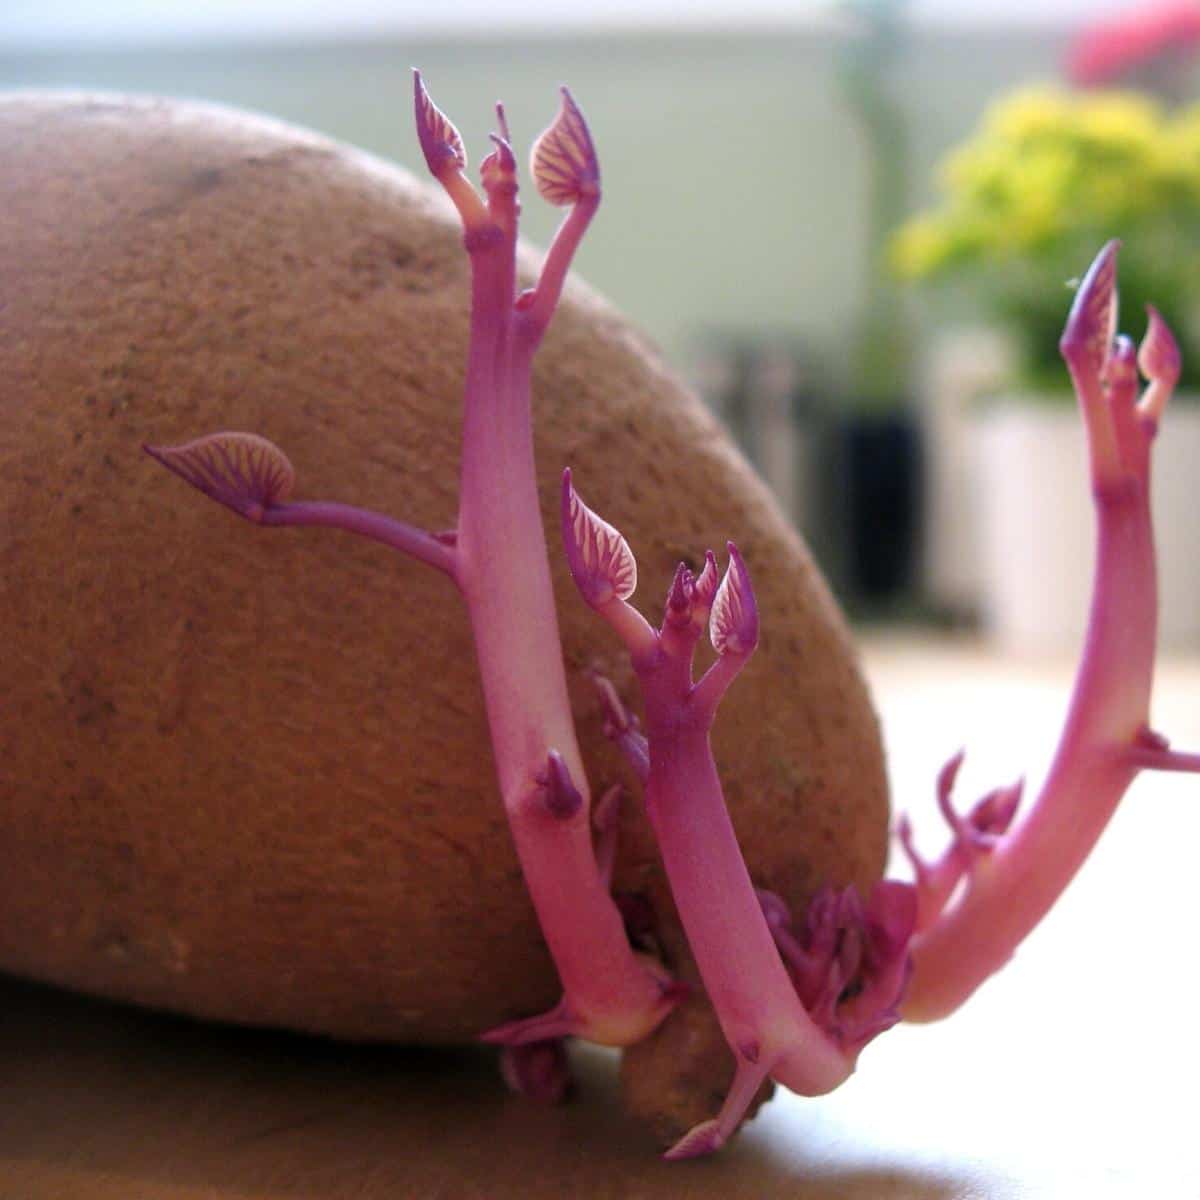 purple sprouts emerging from a sweet potato.